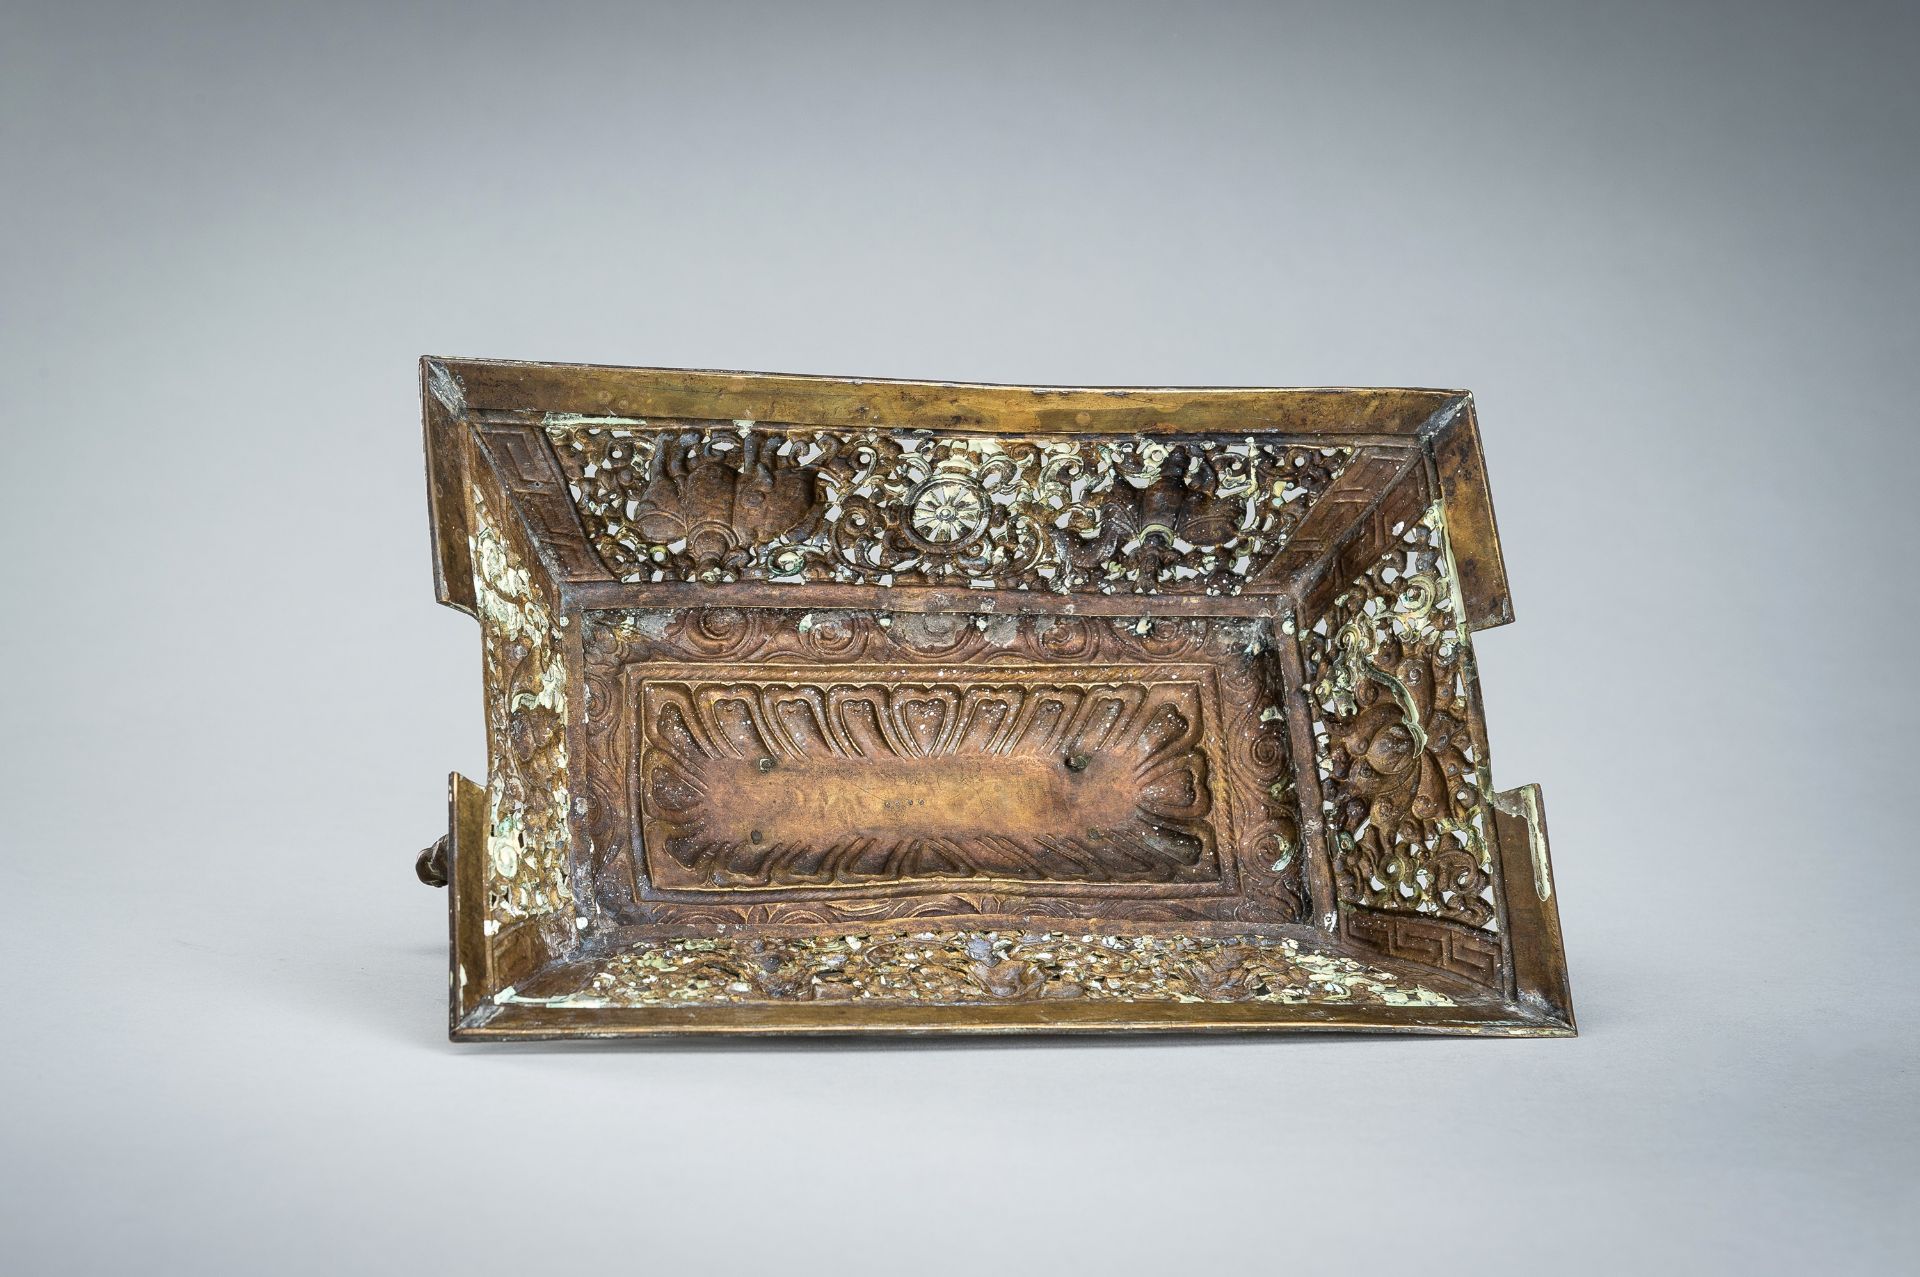 A GILT COPPER REPOUSSE CENSER AND RETICULATED COVER, FANGDING, QING DYNASTY - Image 17 of 20